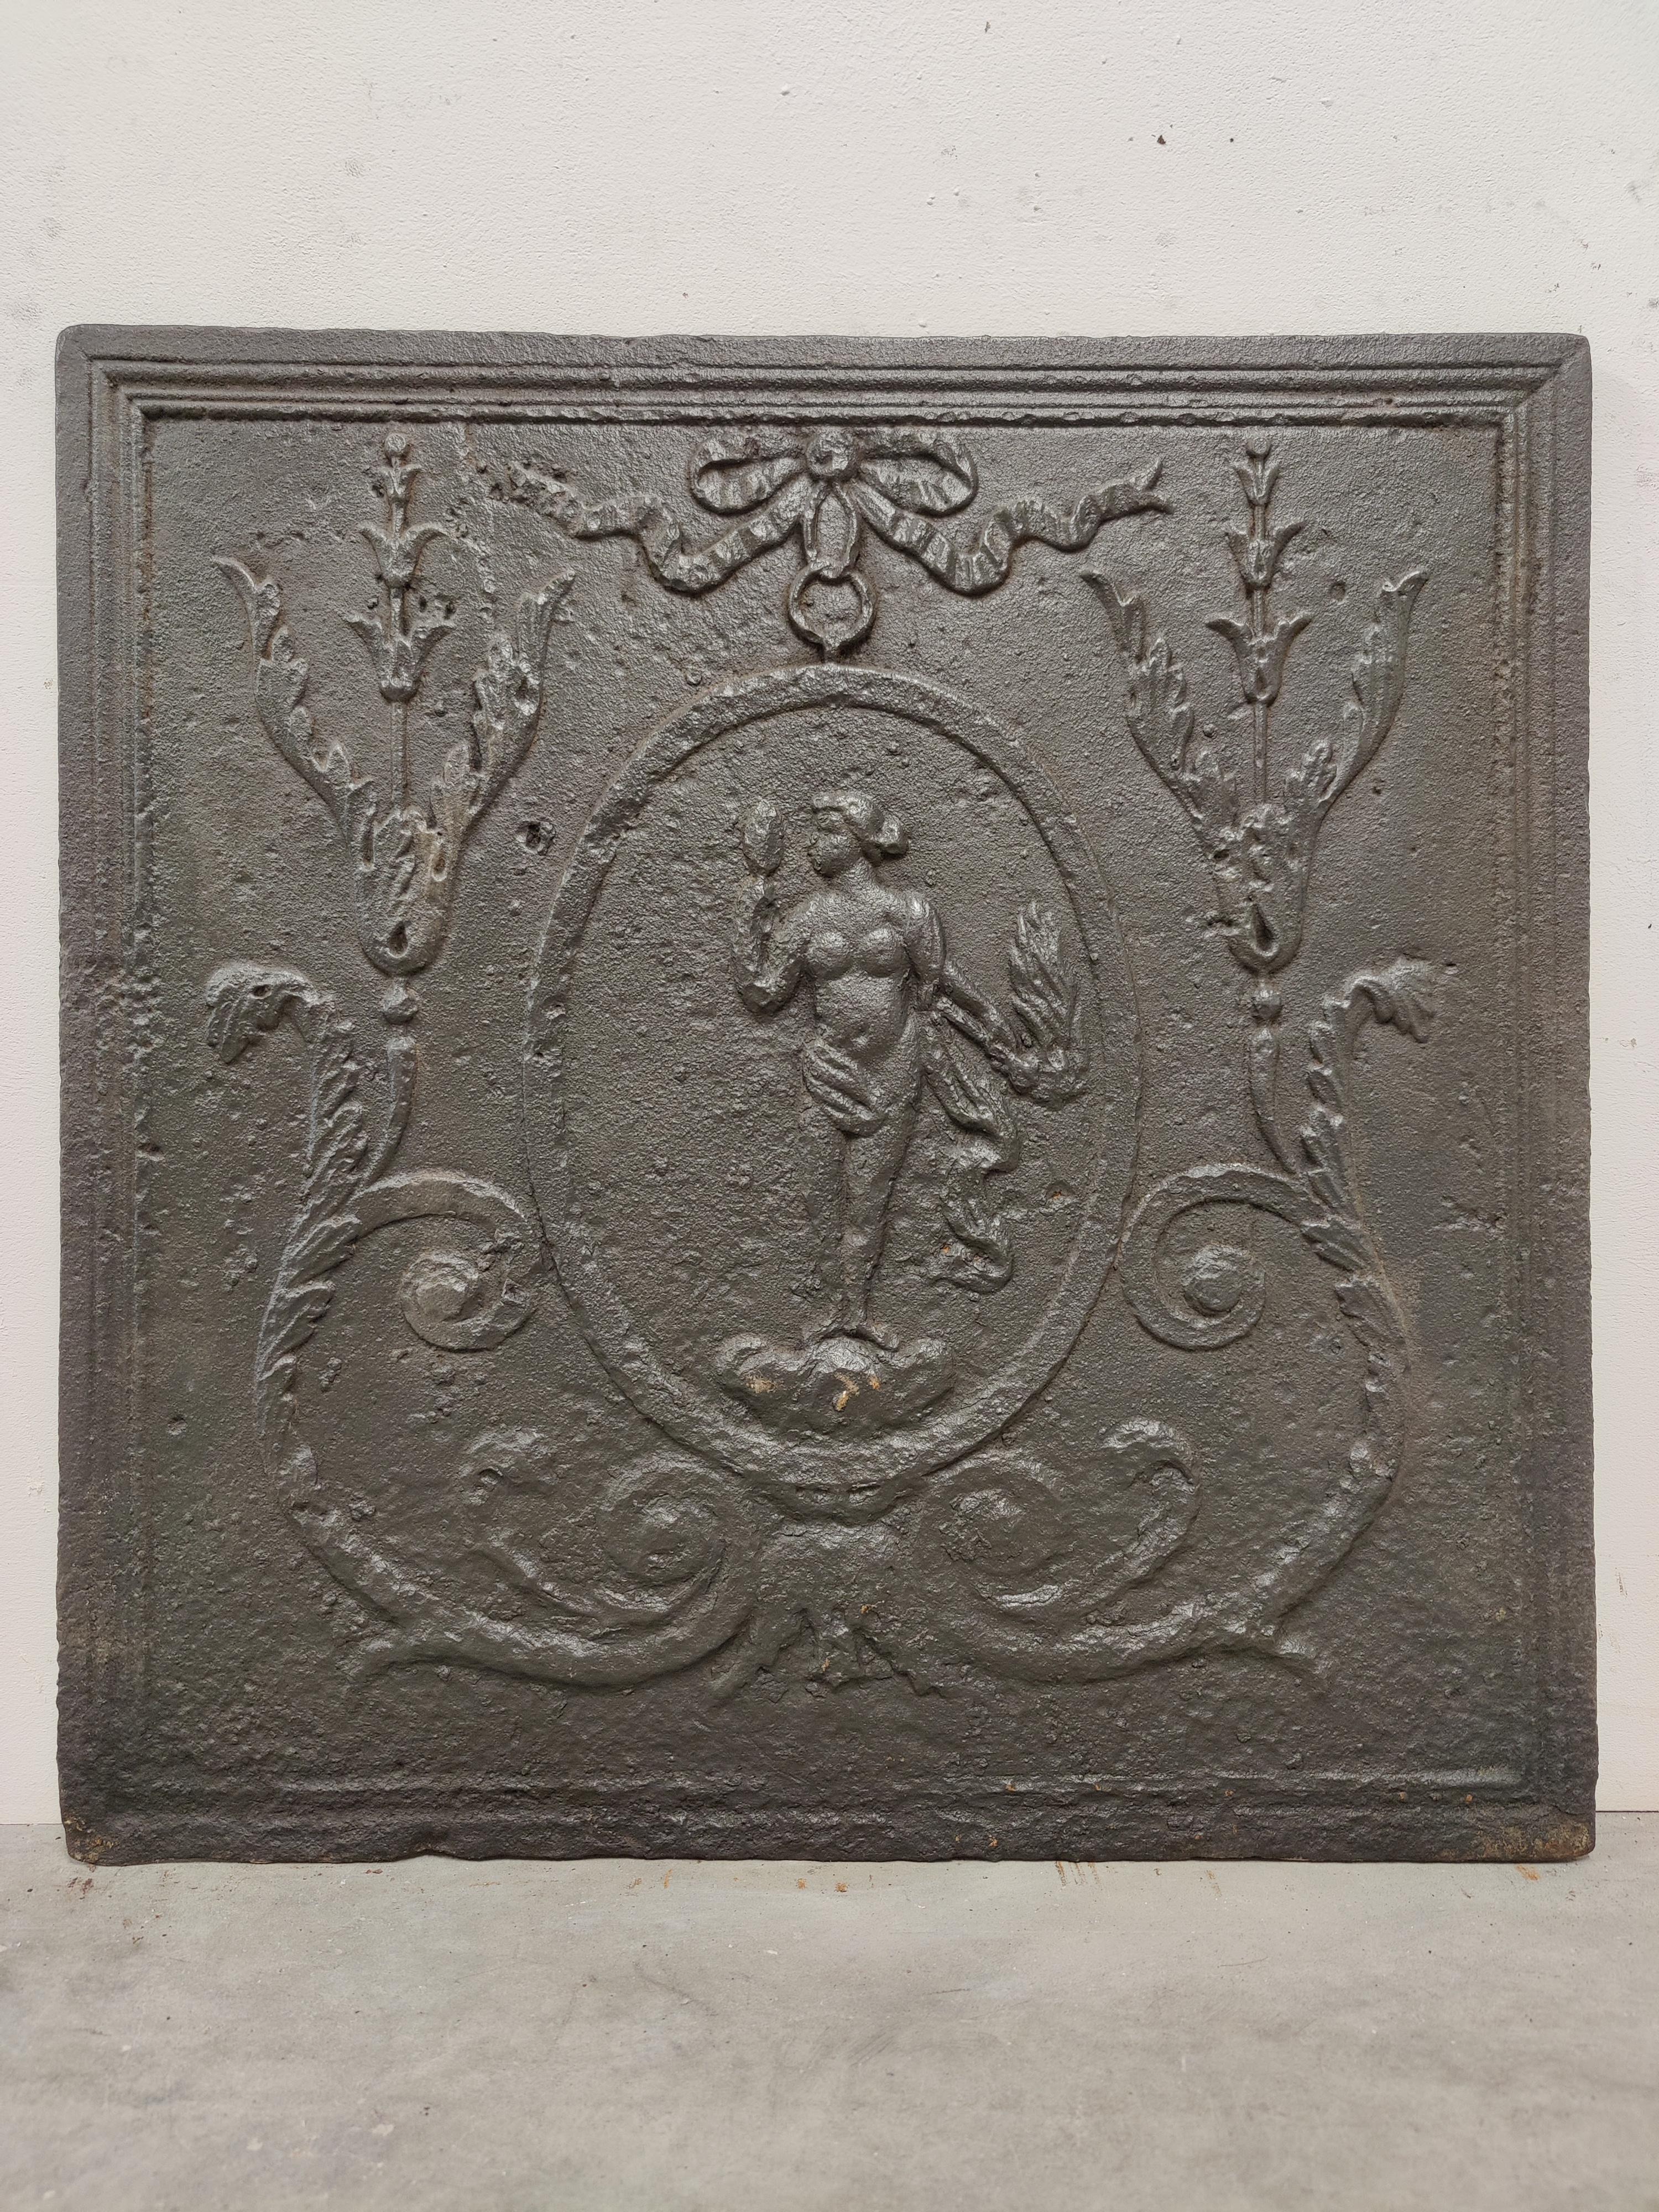 Antique fireback / backsplash, woman holding mirror.

Nice square cast iron antique fireback displaying a woman admiring herself in a mirror.
Great condition, can be used in a real gas or log fire.
Very decorative piece.
75 lbs / 34 kg.


 